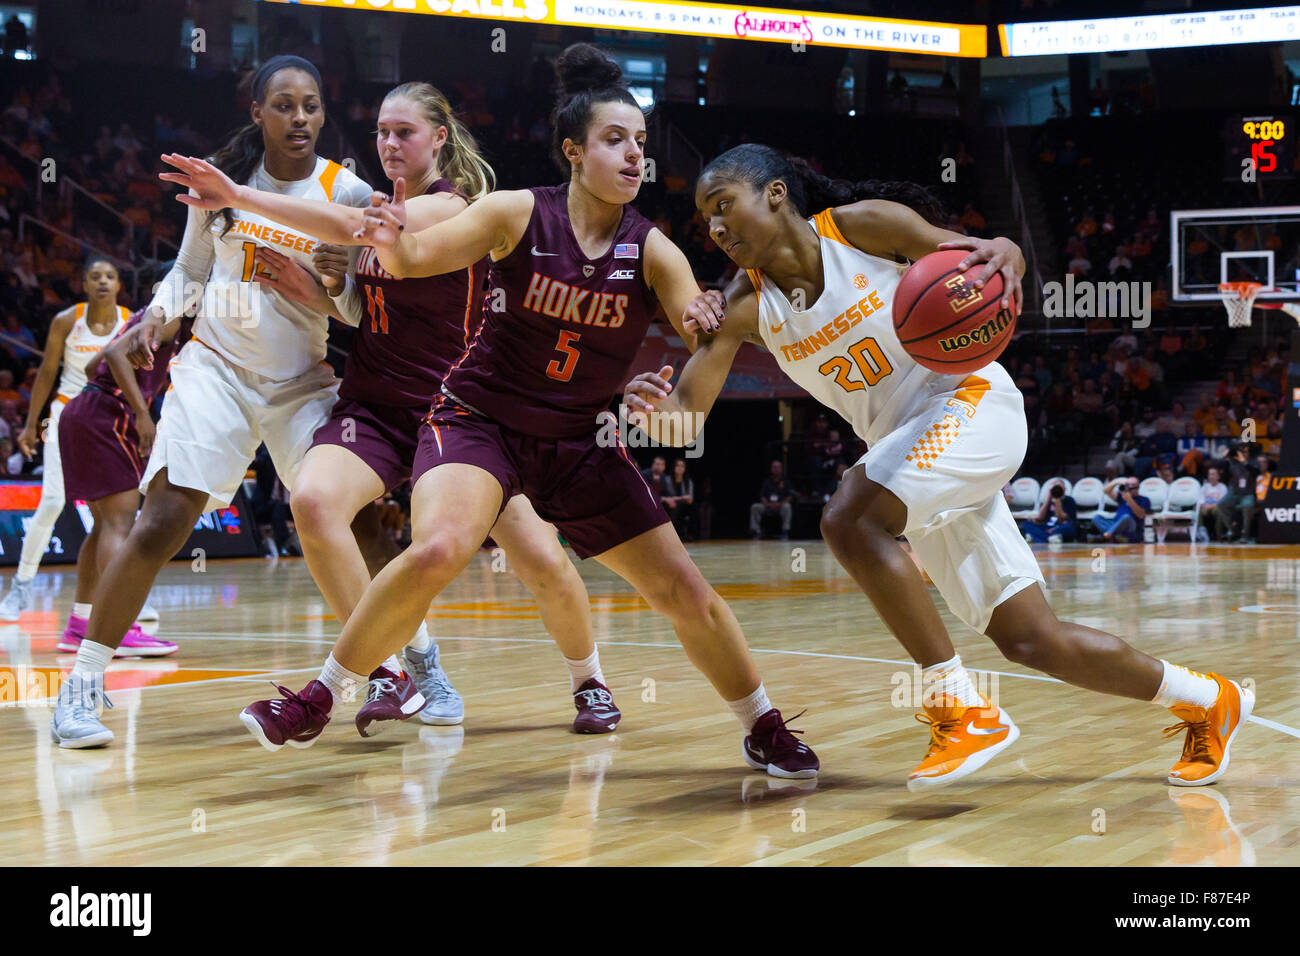 December 6, 2015: Te'a Cooper #20 of the Tennessee Lady Volunteers drives to the basket against Vanessa Panousis #5 of the Virginia Tech Hokies during the NCAA basketball game between the University of Tennessee Lady Volunteers and the Virginia Tech Hokies at Thompson Boling Arena in Knoxville TN Tim Gangloff/CSM Stock Photo